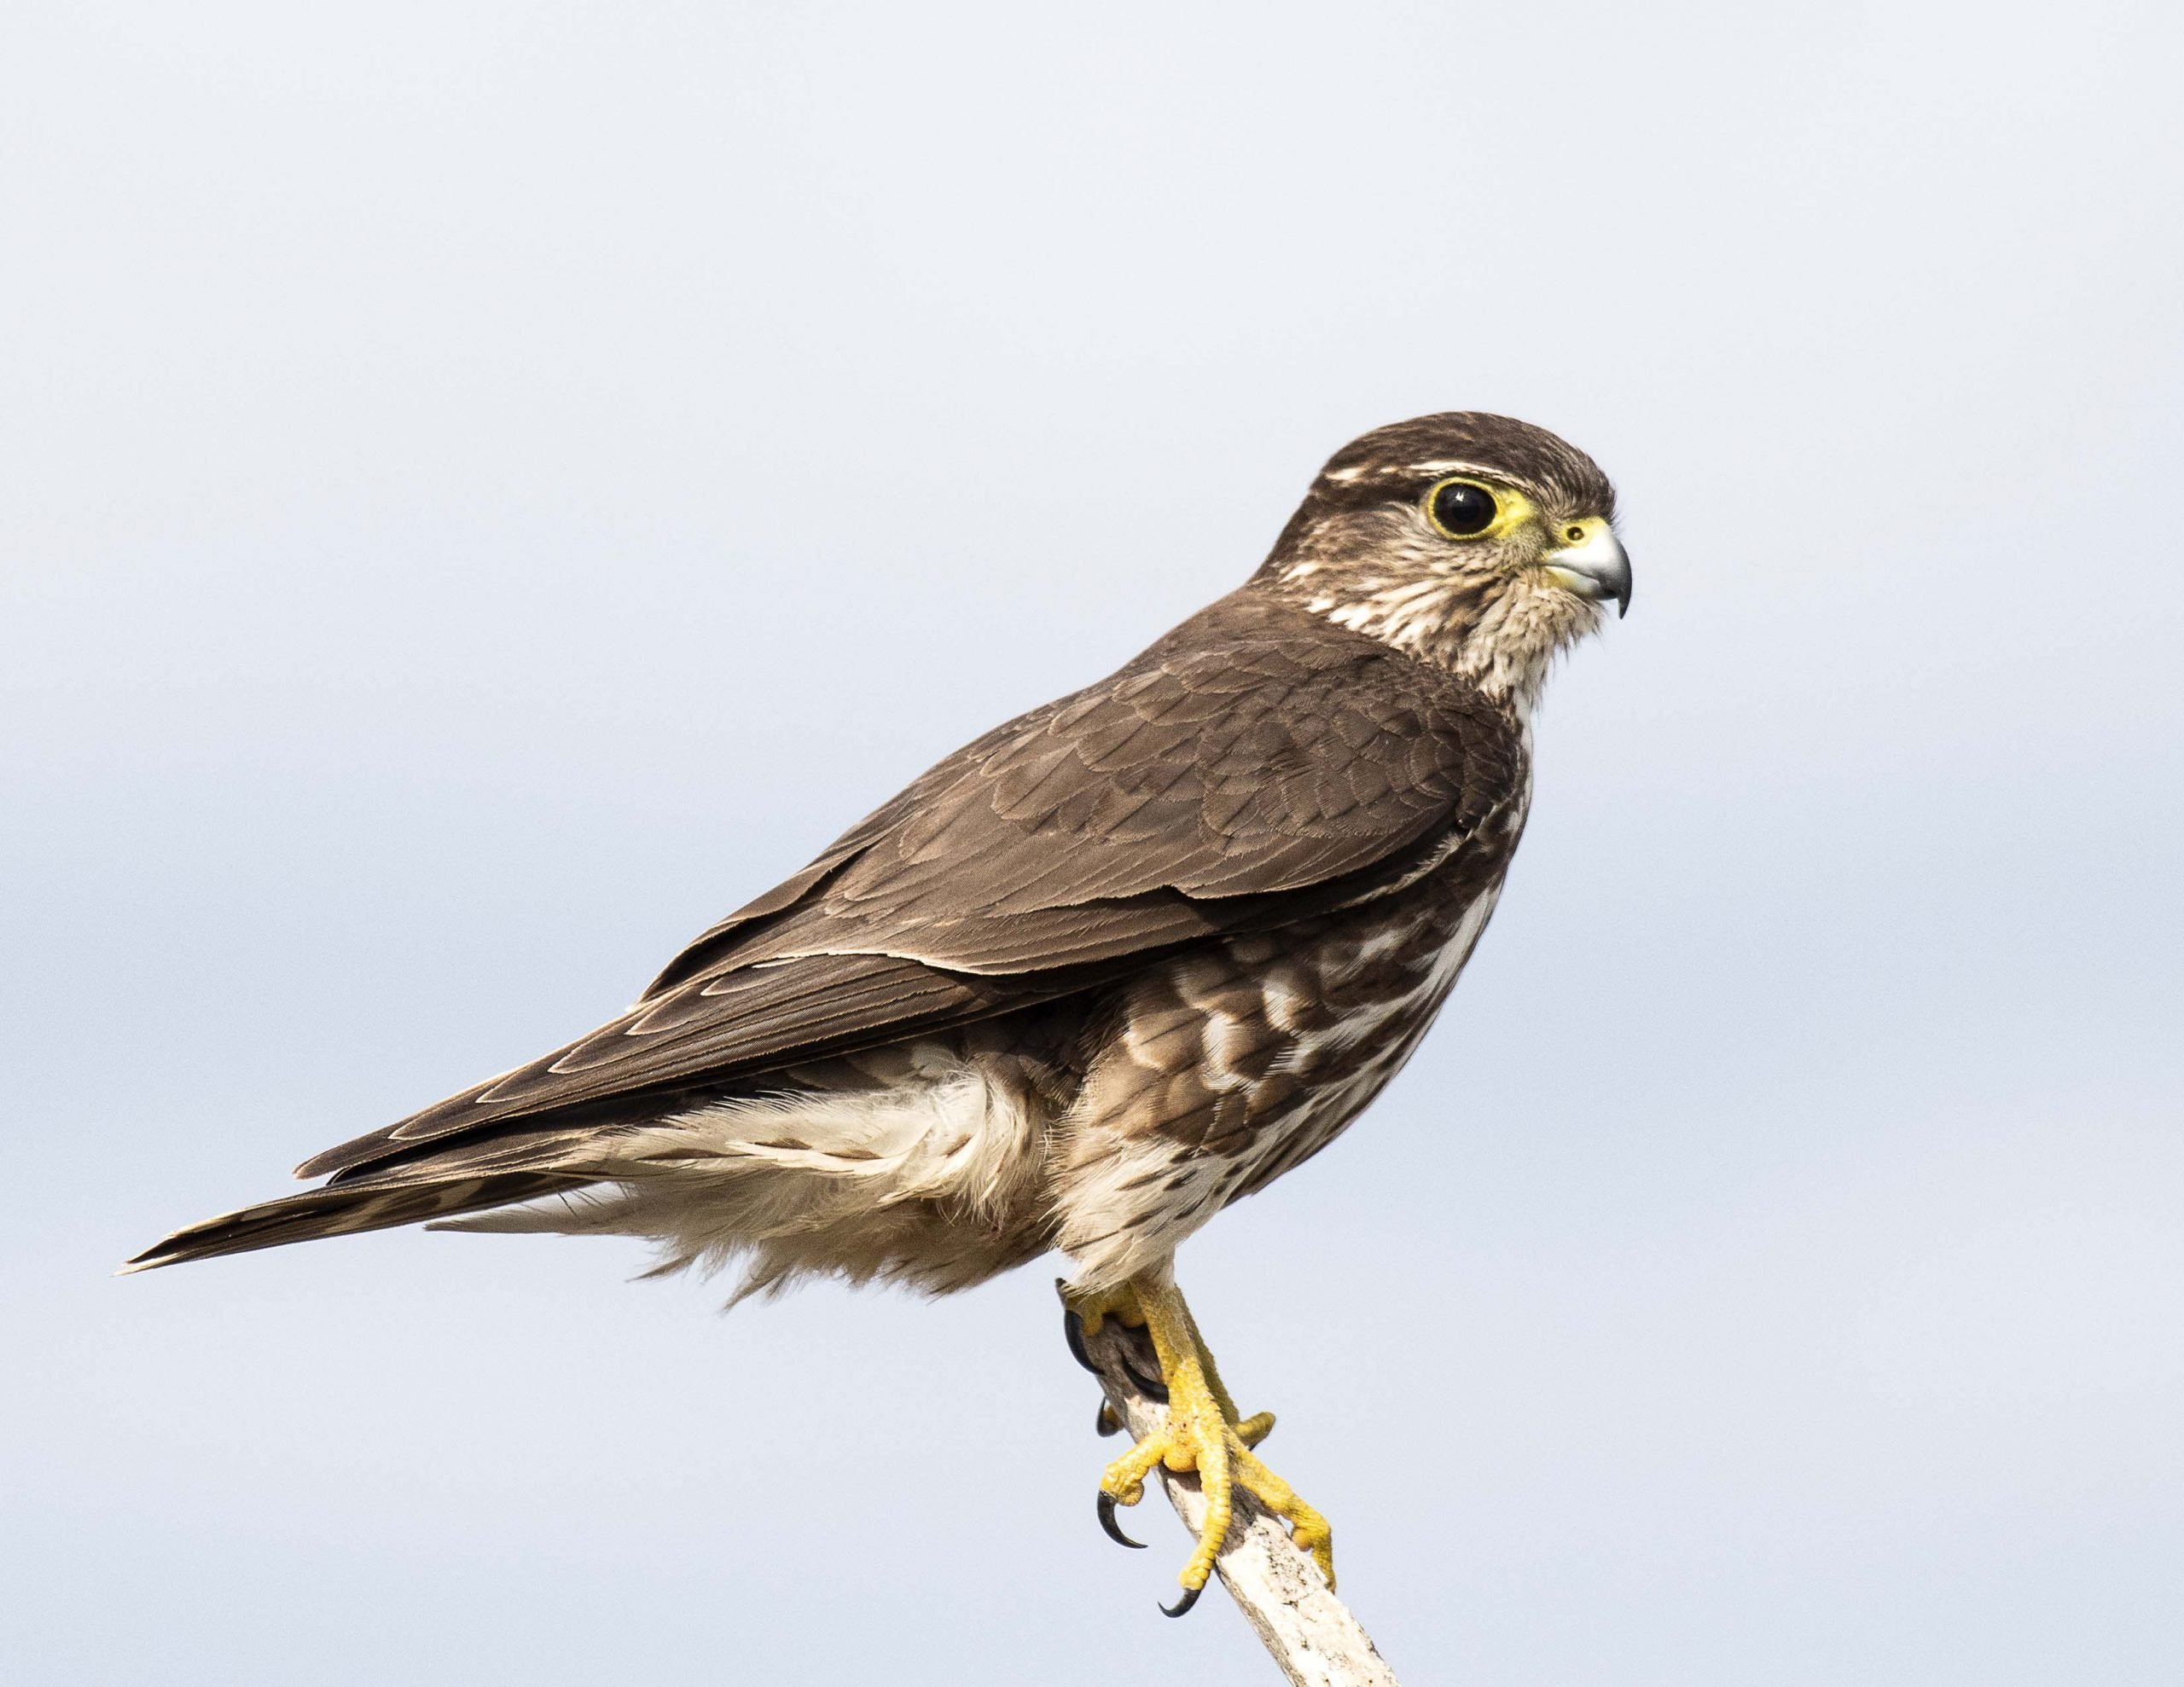 Meet the Merlin: Falcon on the Hunt